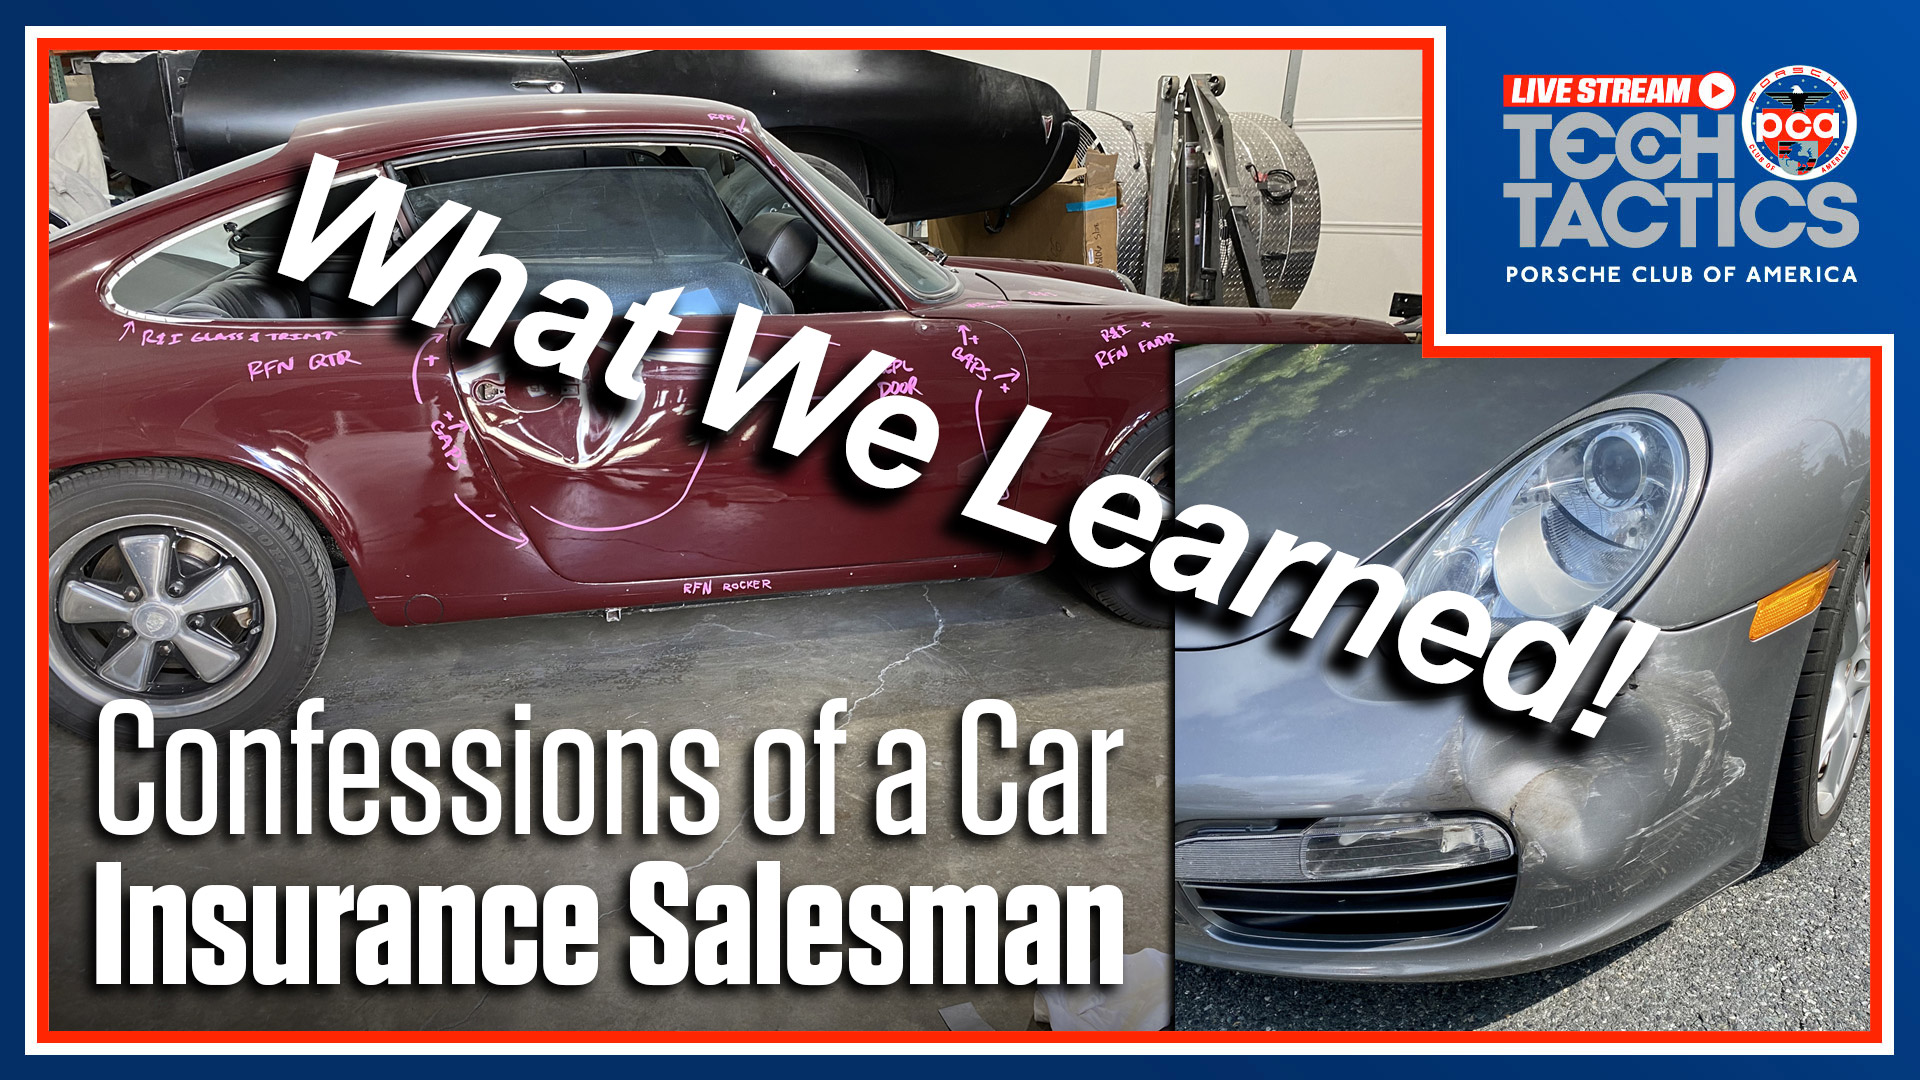 11 Things We Learned About Car Insurance on Tech Tactics Live